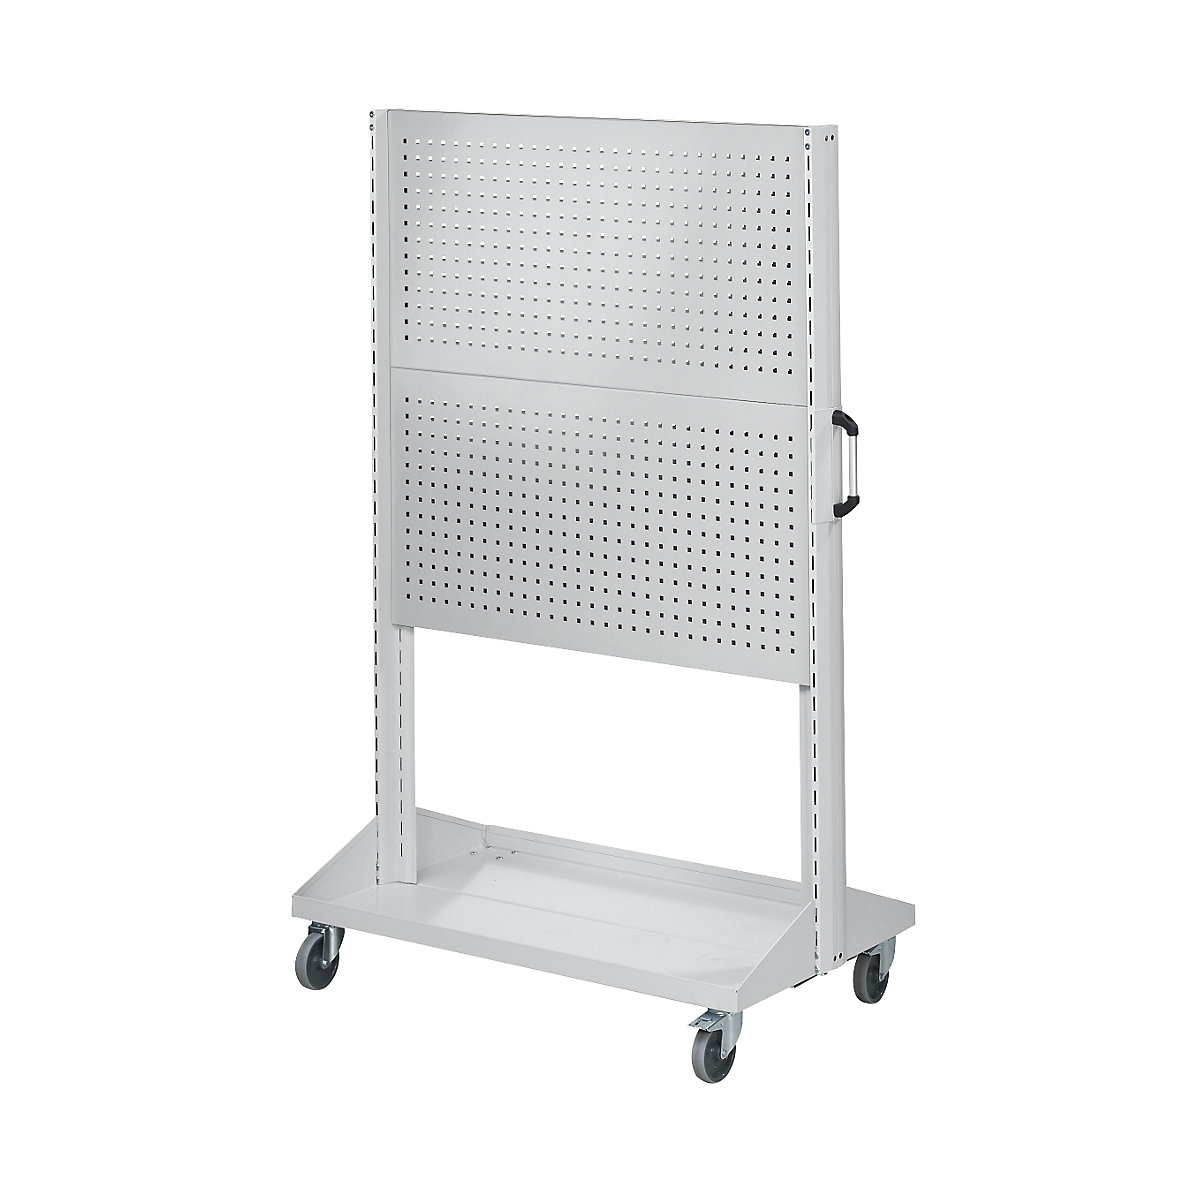 Tool and assembly trolley – ANKE, trolley with 2 x 2 perforated panels, length 1250 mm, grey-2